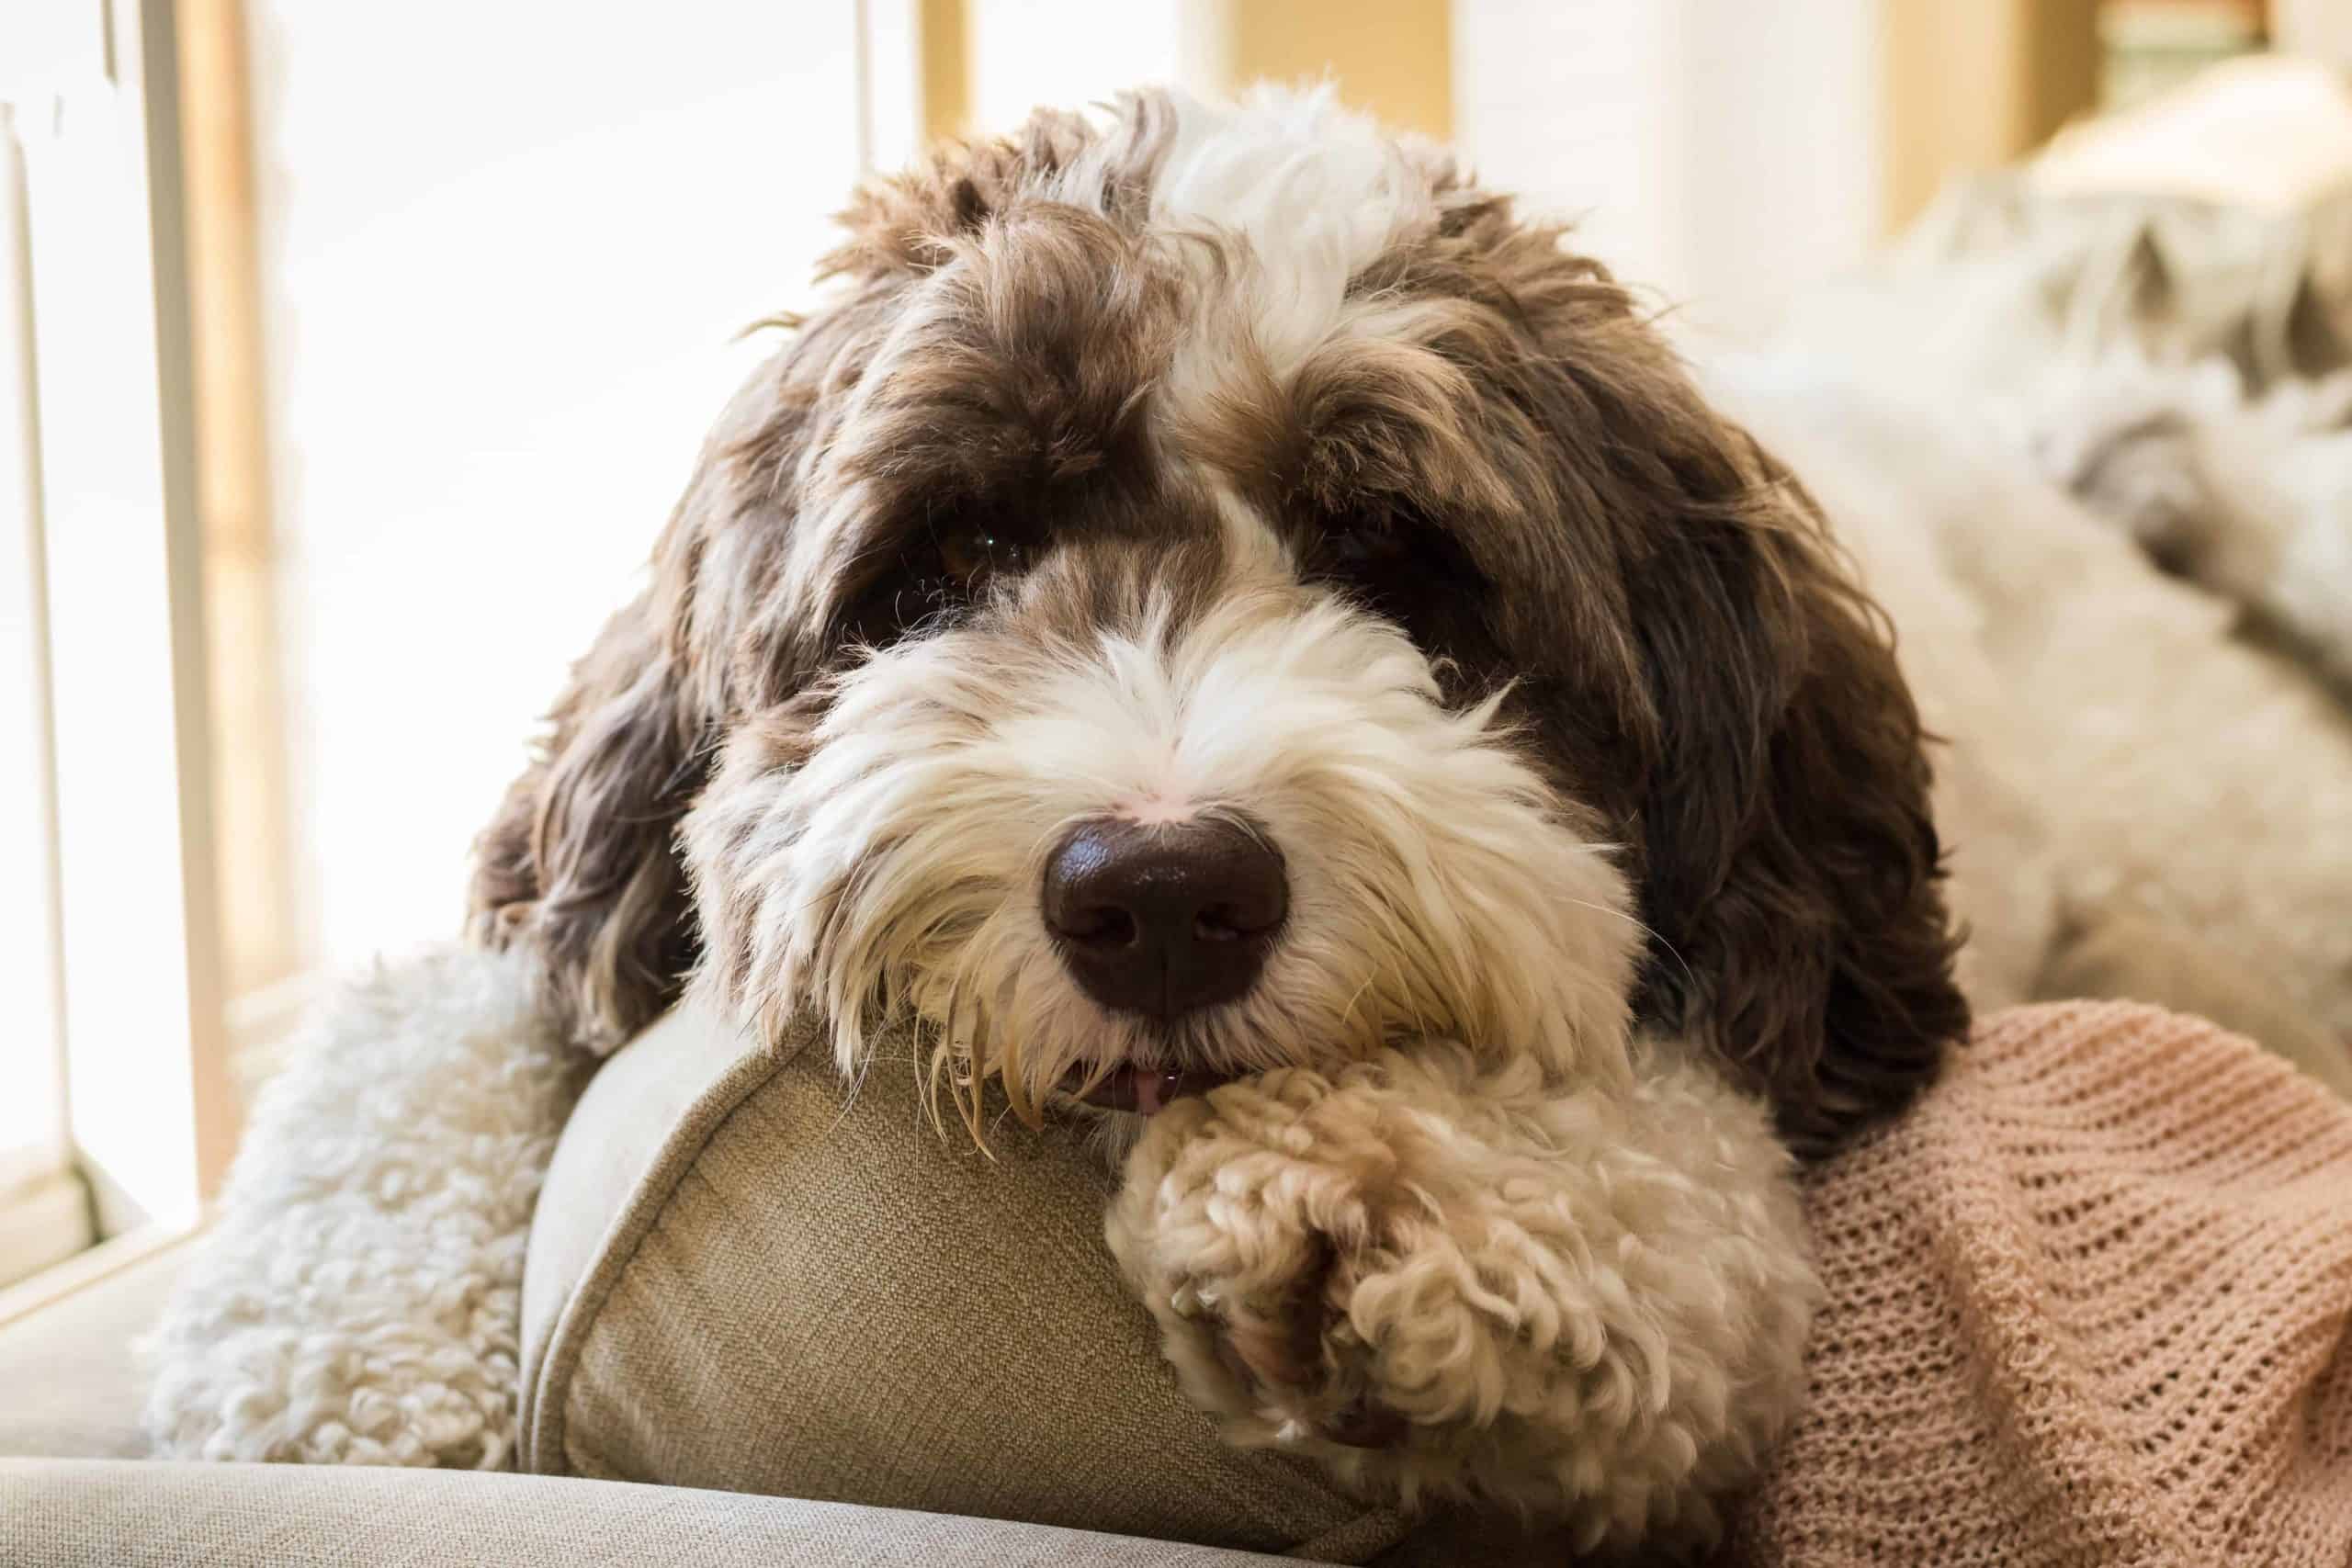 Labradoodle puppy sits on couch. Labradoodles are natural people-pleasers and have a calm, friendly temperament.